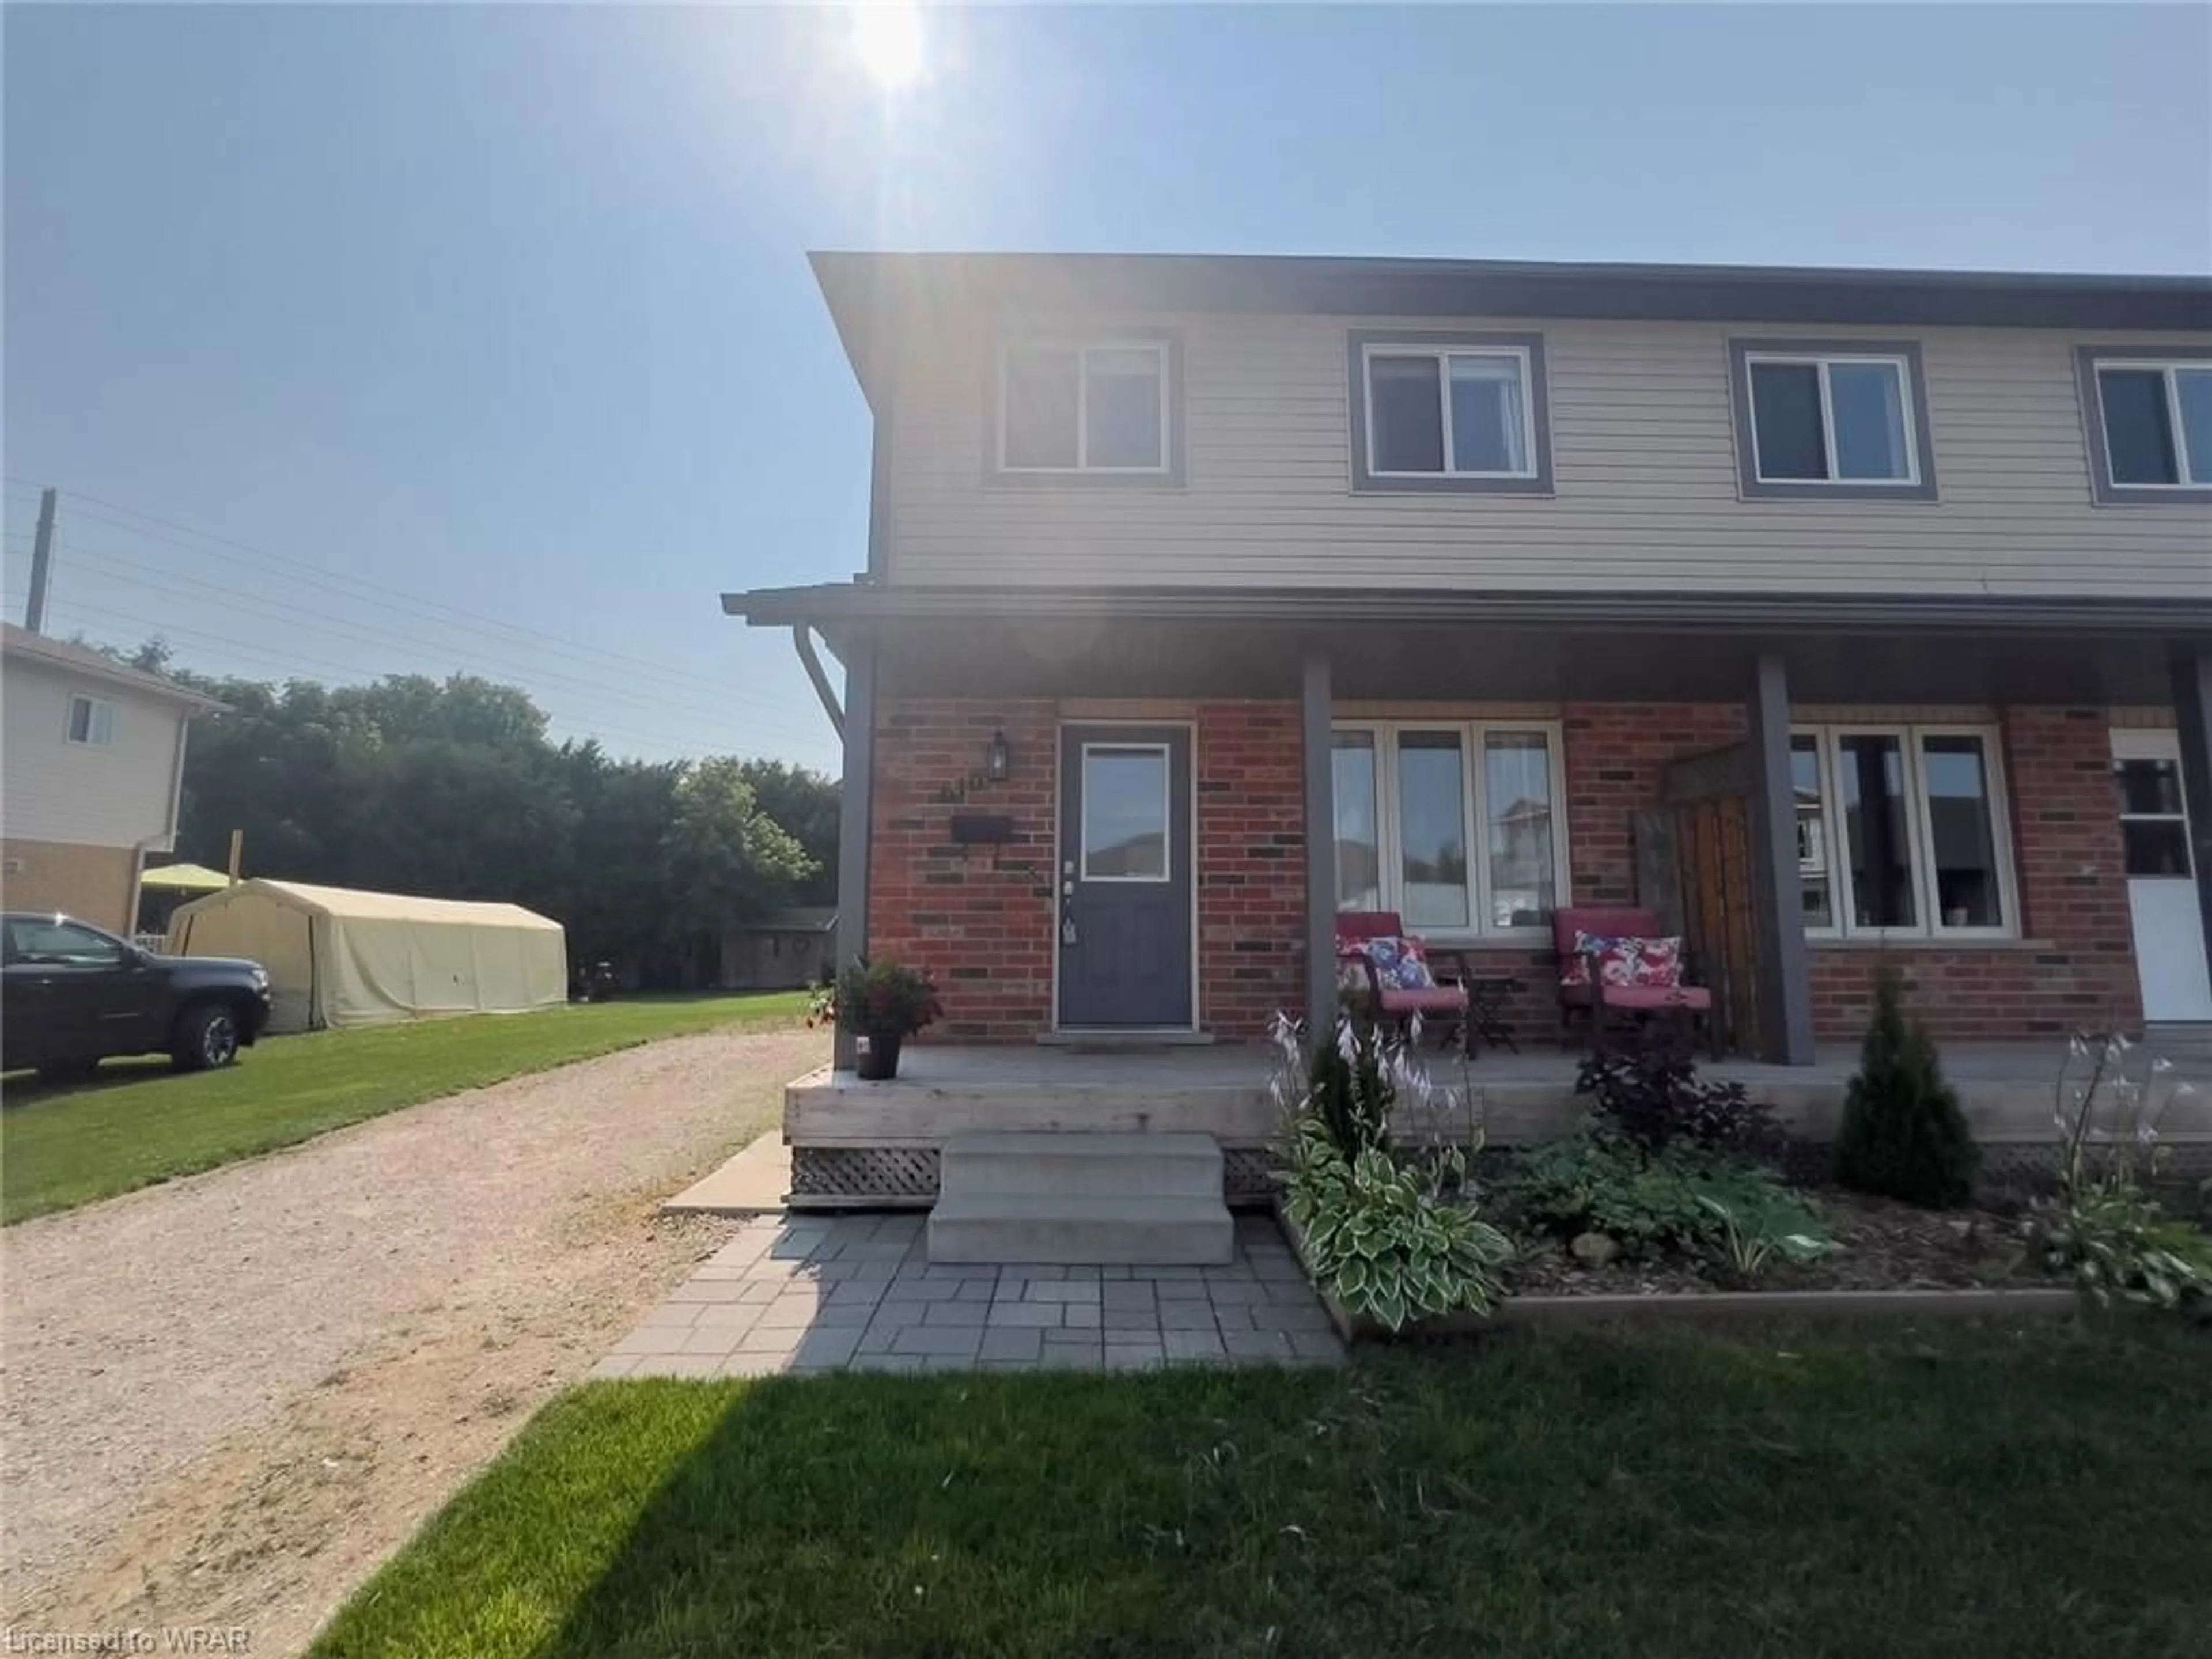 Frontside or backside of a home for 610 Salisbury Ave, Listowel Ontario N4W 1Y8